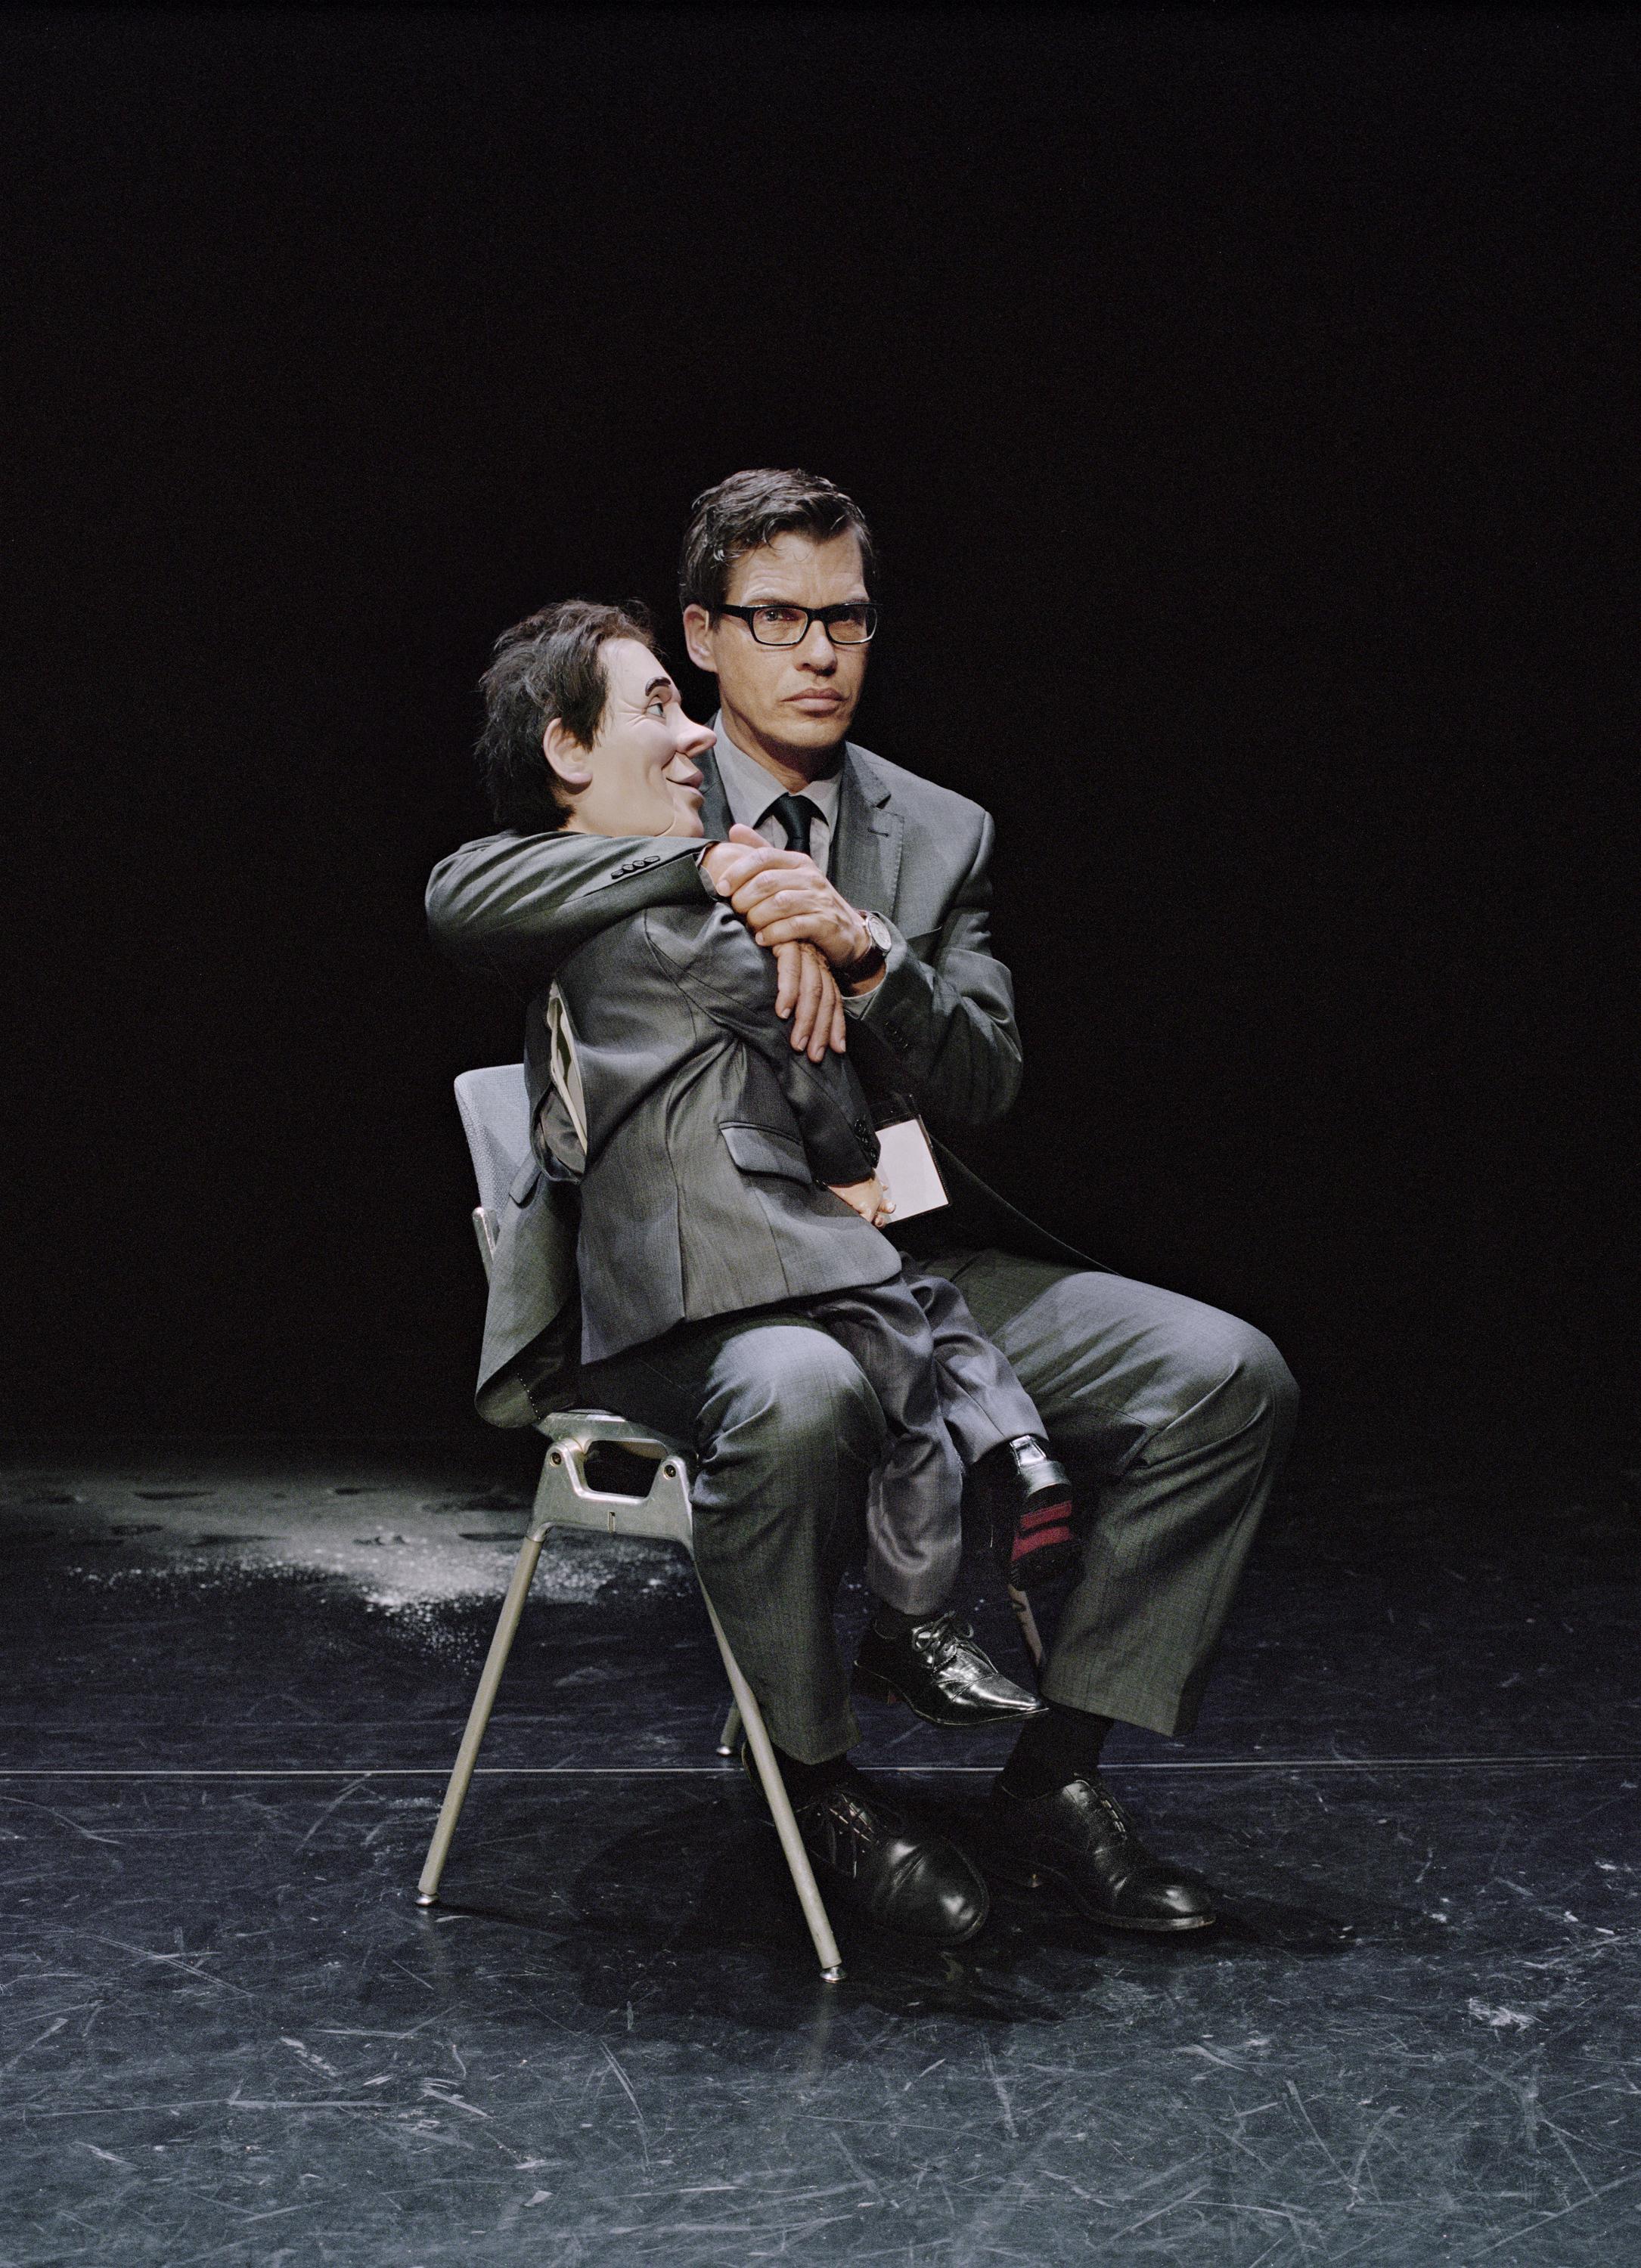 Man dressed in a suit sits on a dark stage draping his arm around a large puppet on his lap that resembles him